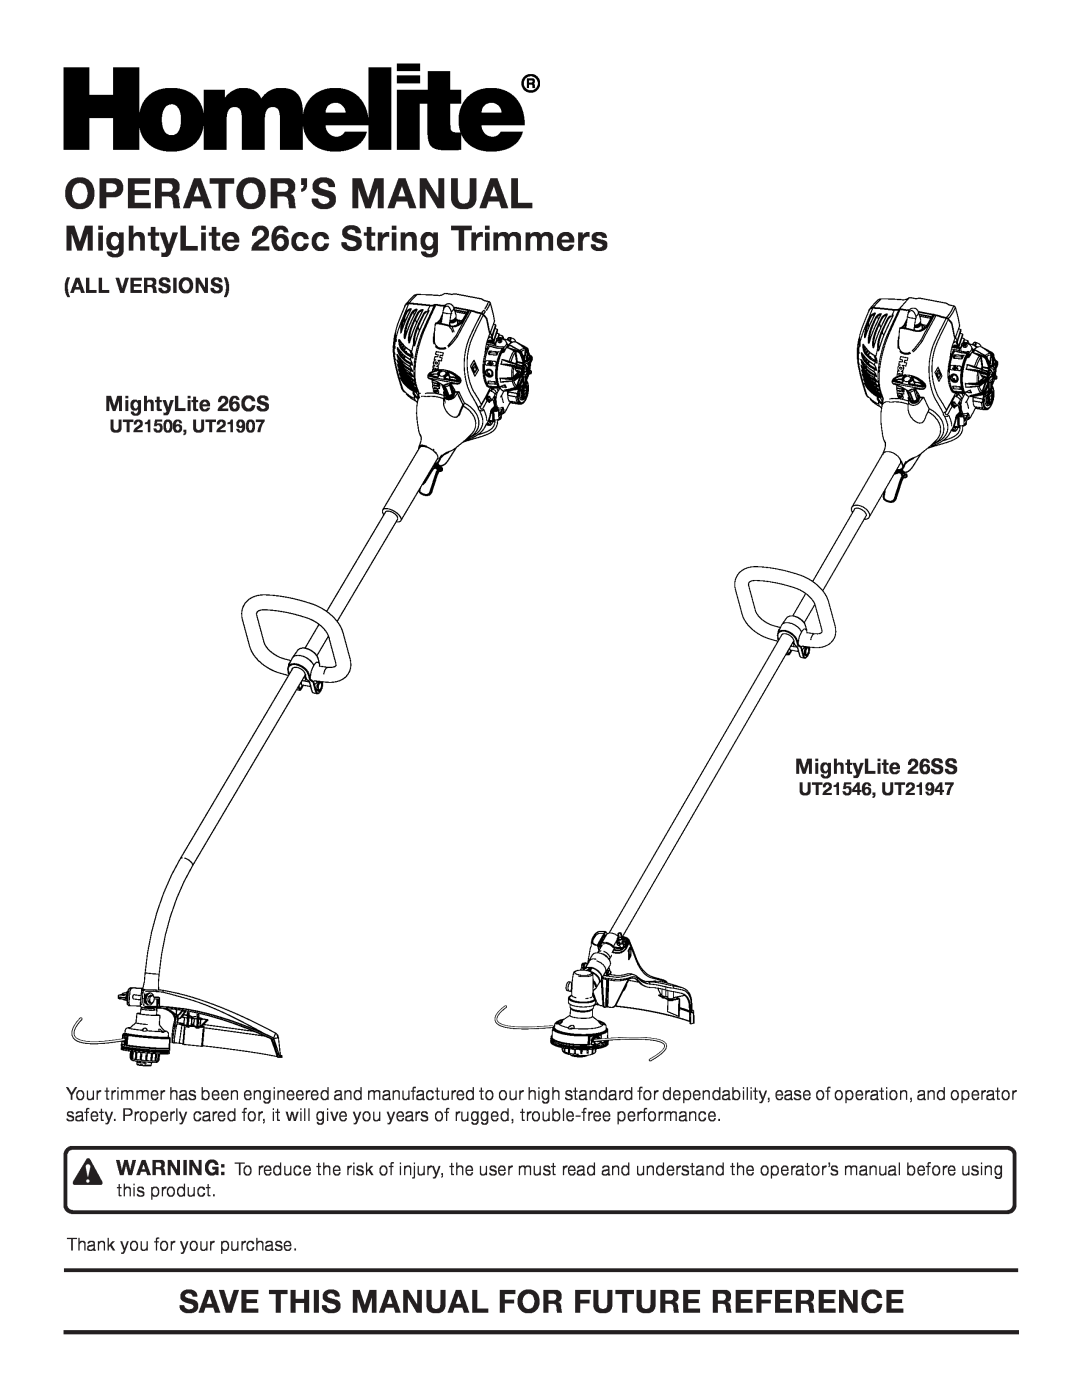 Homelite UT21506, UT21546 manual Operator’S Manual, MightyLite 26cc String Trimmers, Save This Manual For Future Reference 